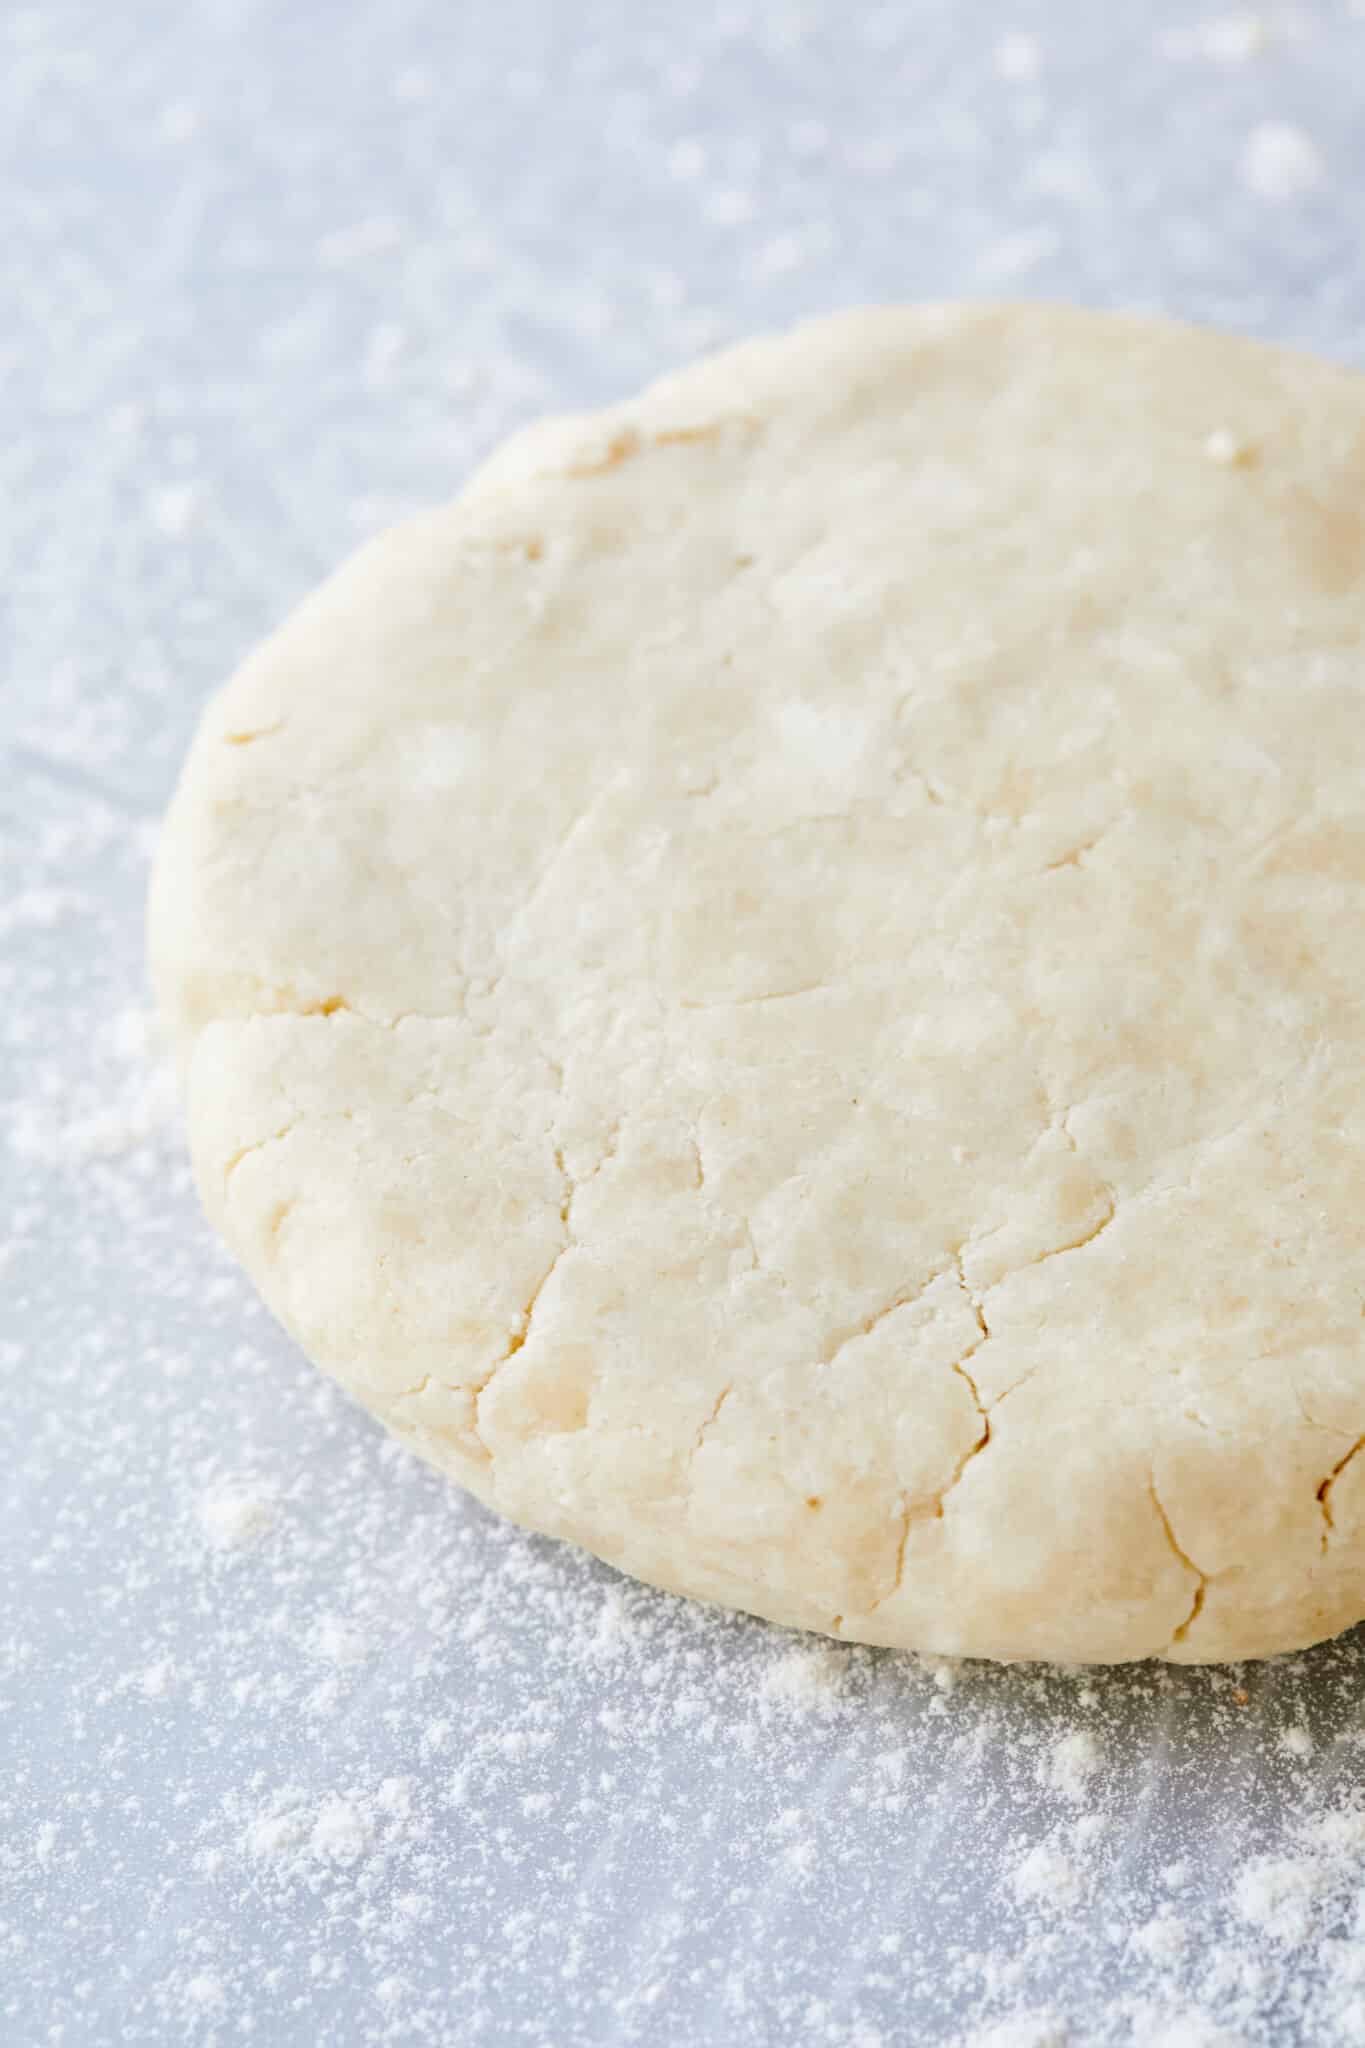 For pastry perfection, allow your dough to chill as the one in this image, which is shaped into a disc.